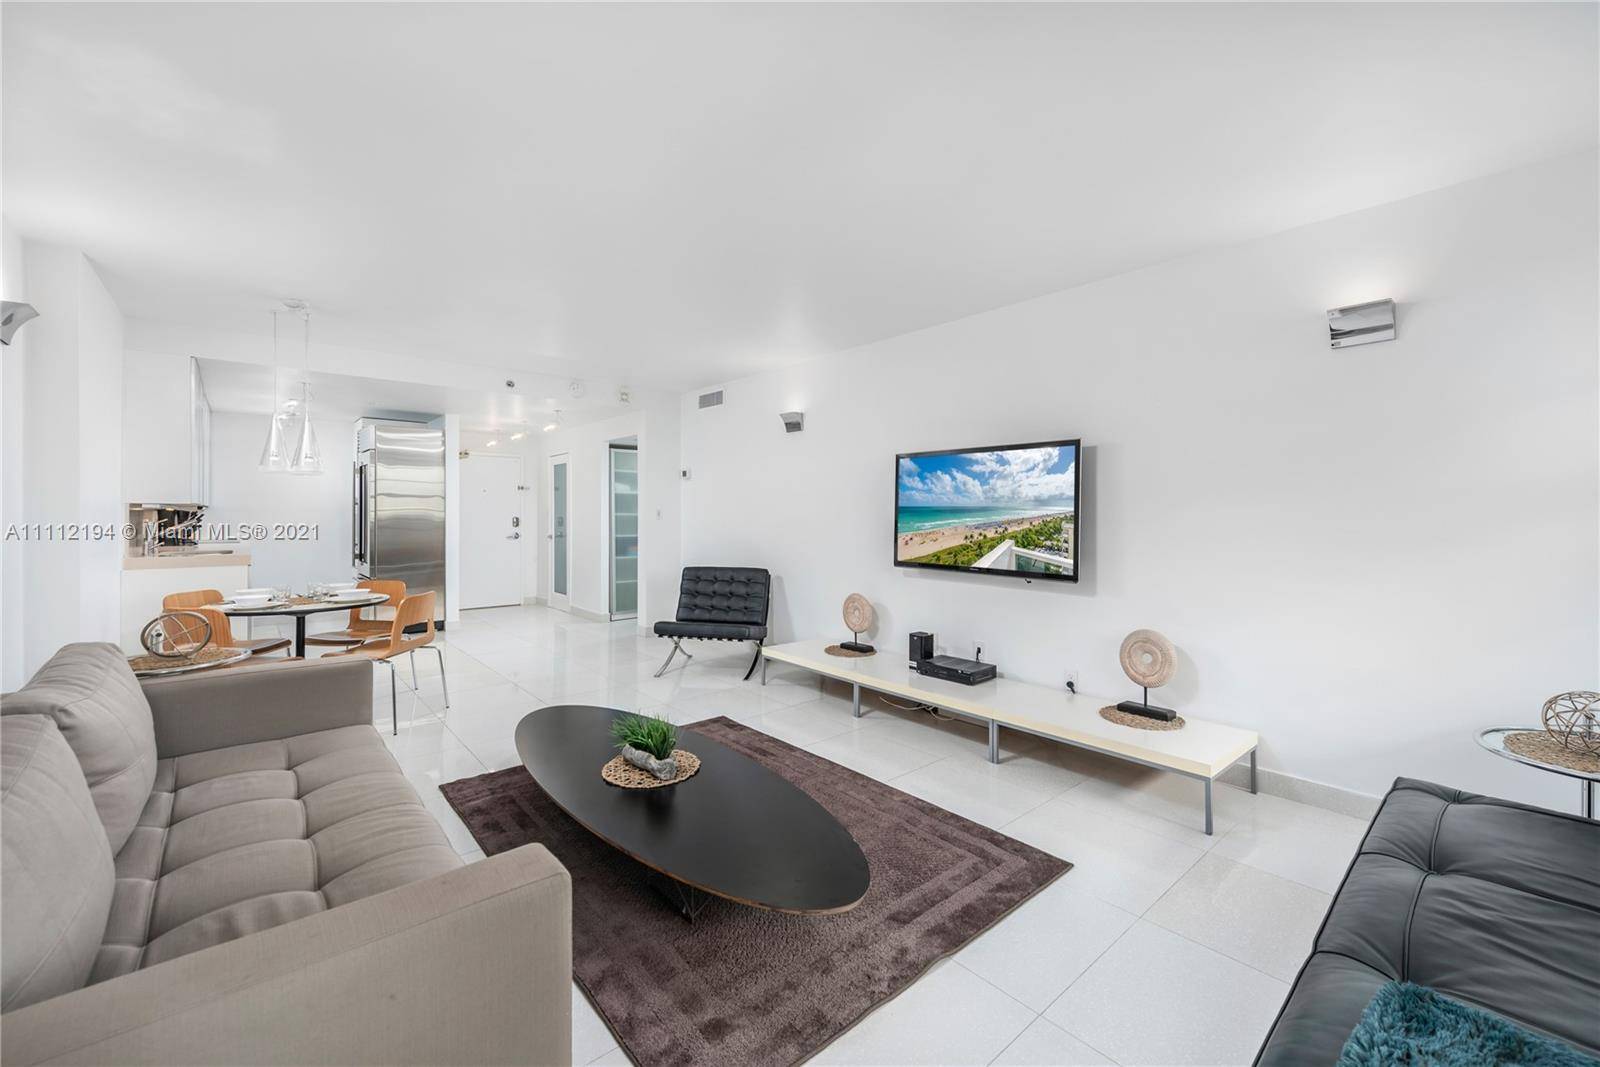 The Decoplage condominium is located at 100 Lincoln Road in the heart of South Beach area in Miami Beach, just a few steps from the Atlantic Ocean and a few ...